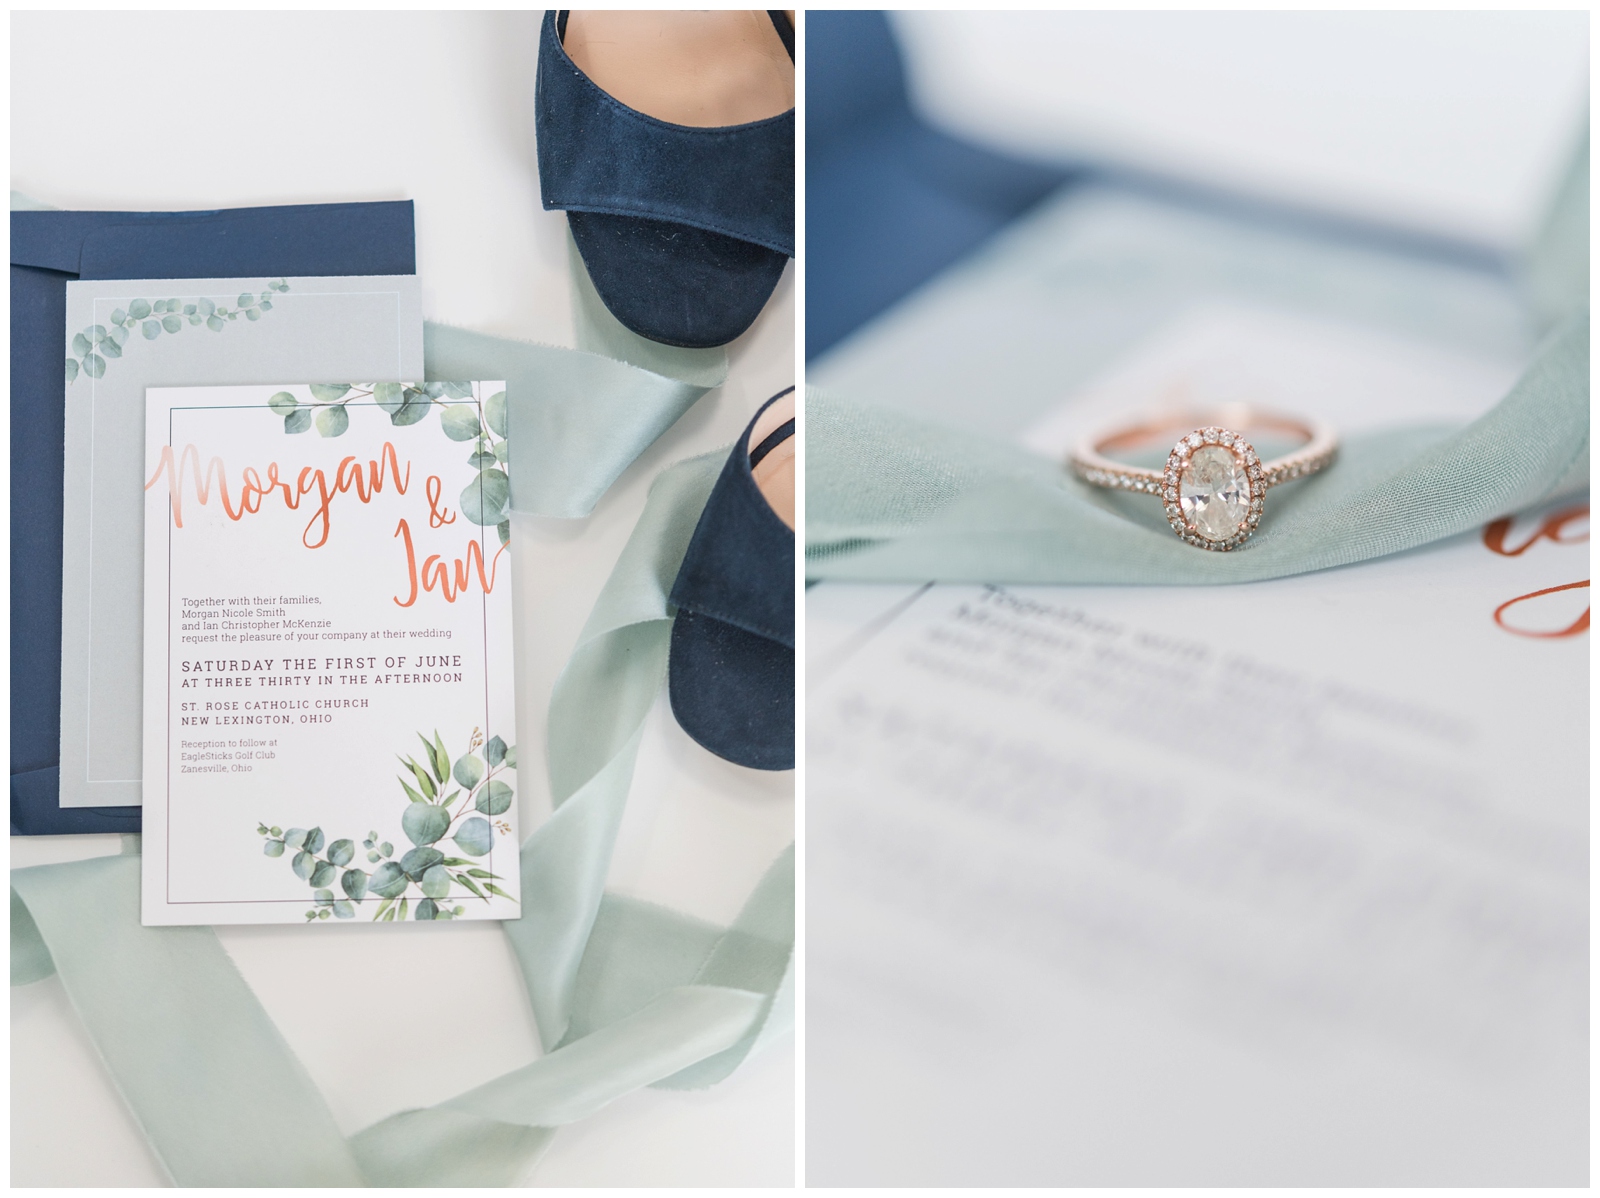 watercolor inspired wedding invitations with greenery by Colleen Irman and navy blue shoes